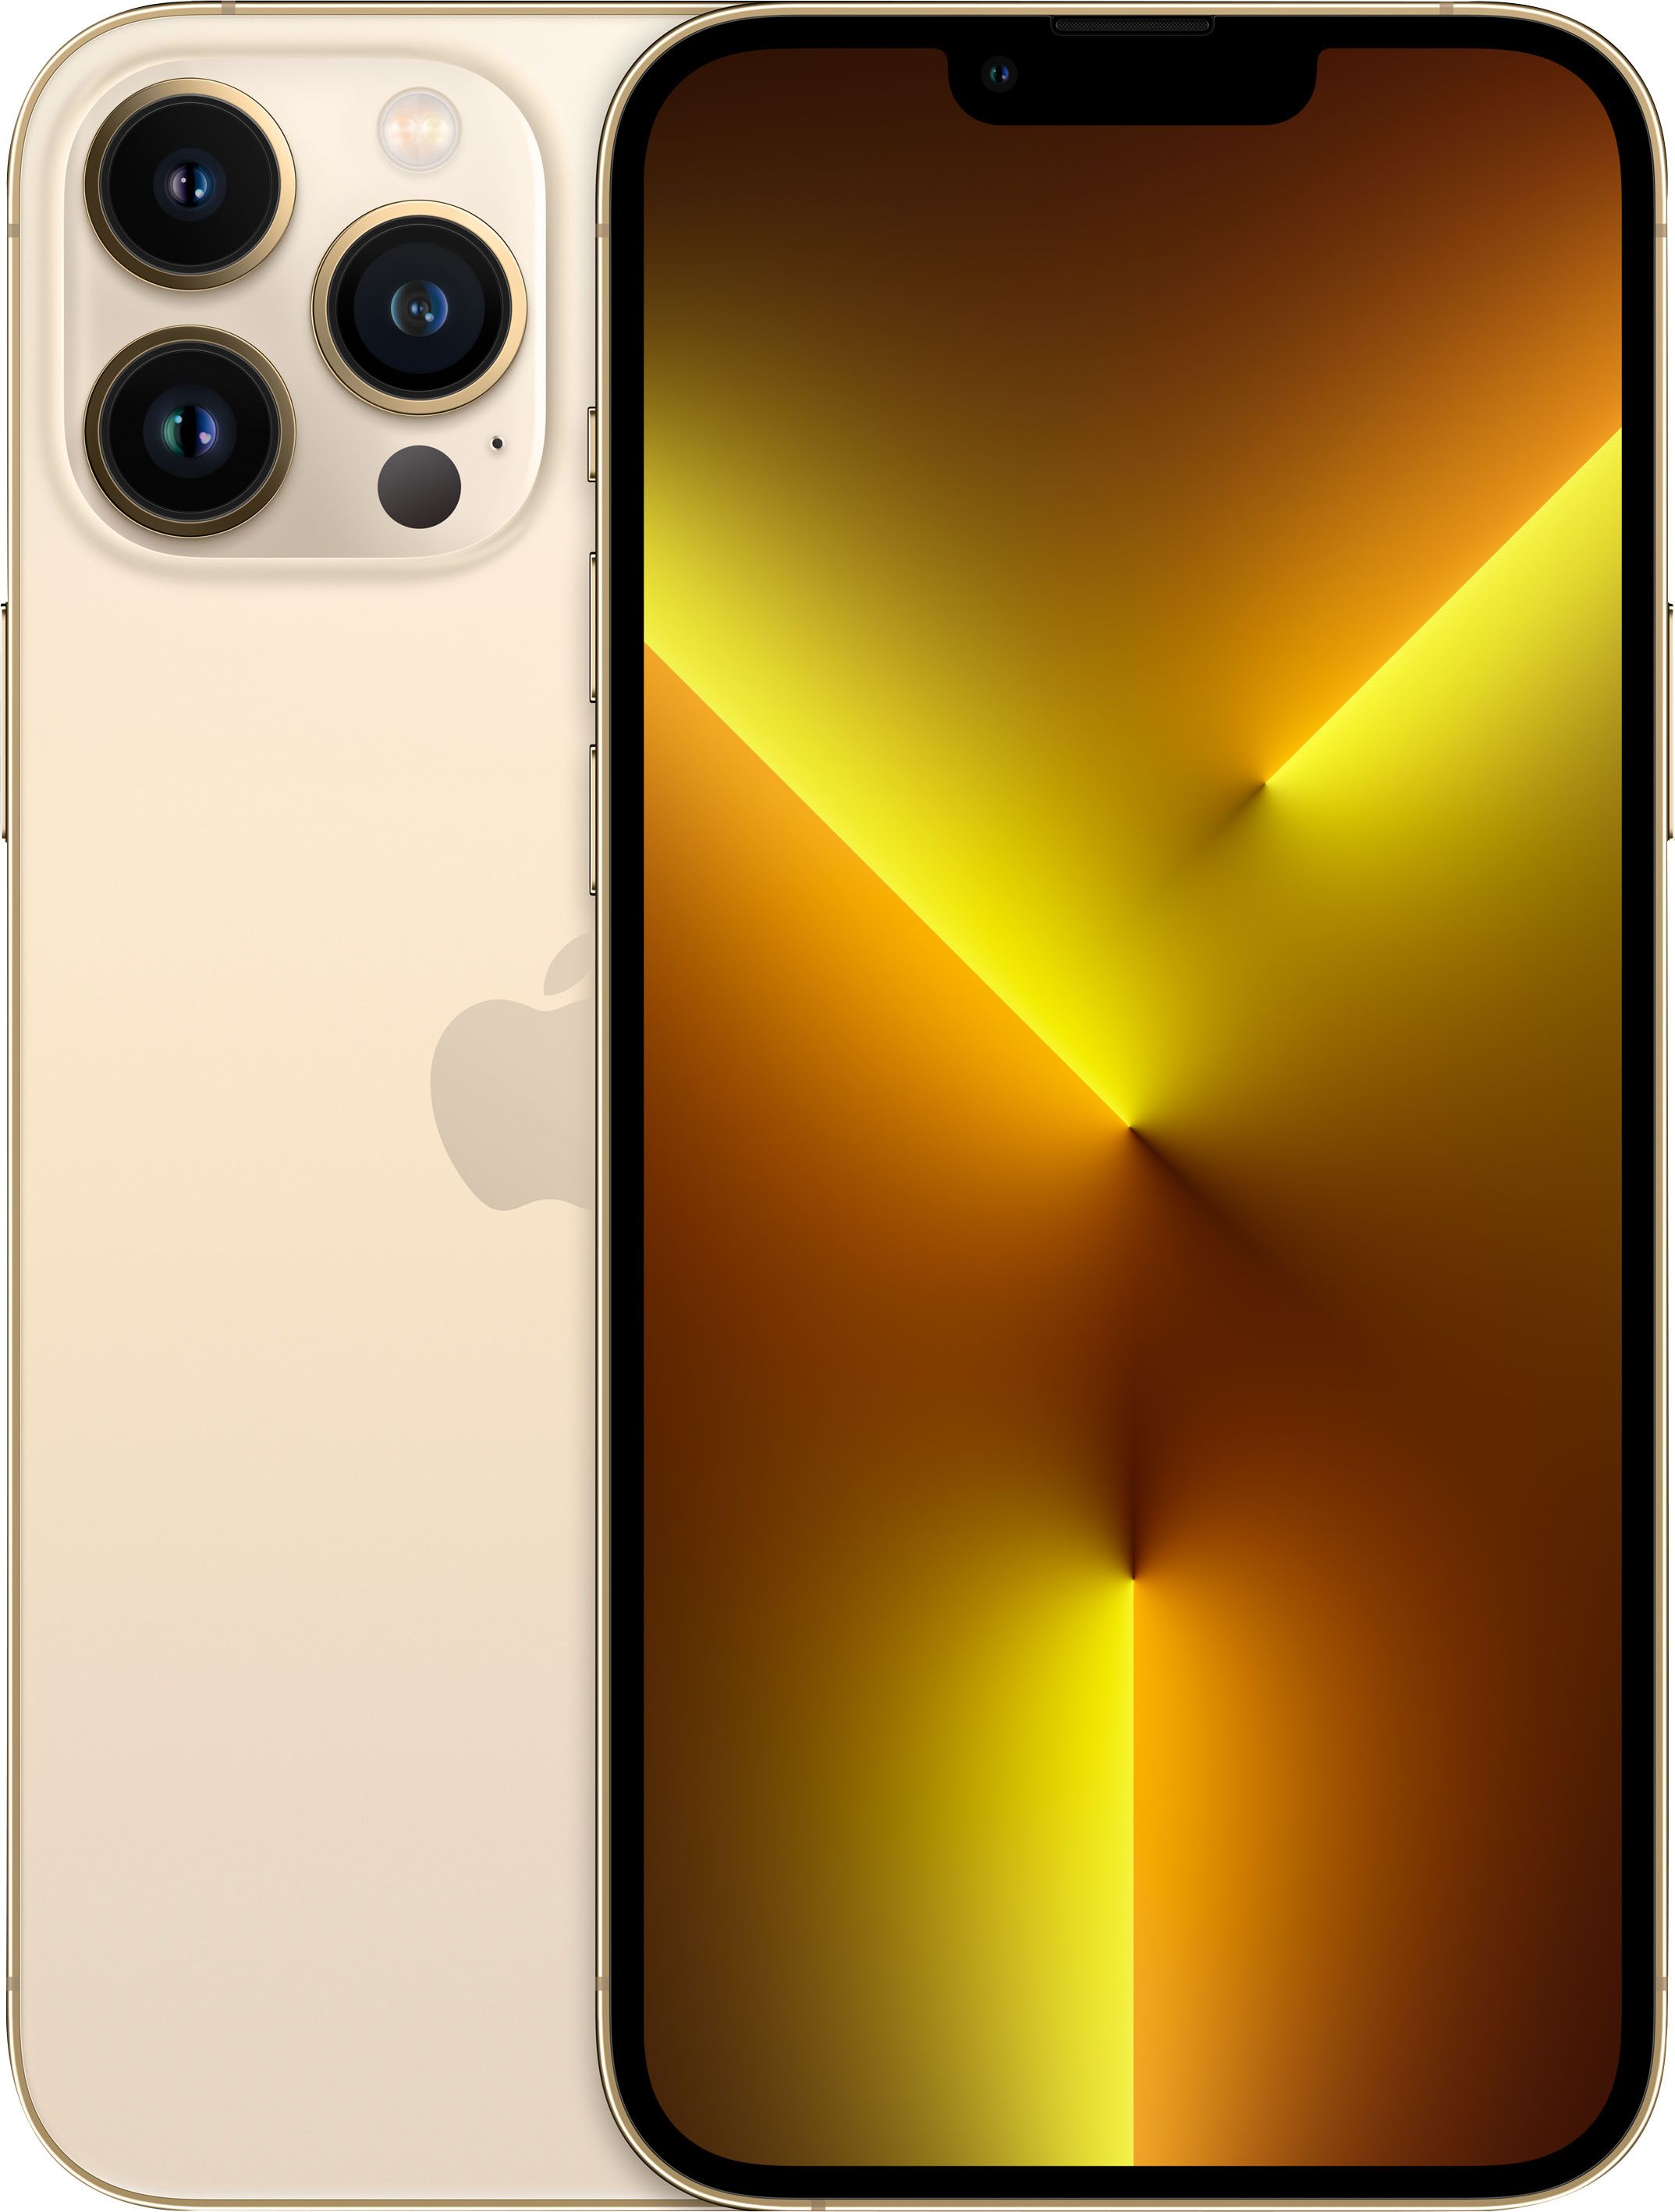 Apple iPhone 12 Pro Max 128GB Fully Unlocked (at&t + T-Mobile + Verizon + Sprint) - Gold